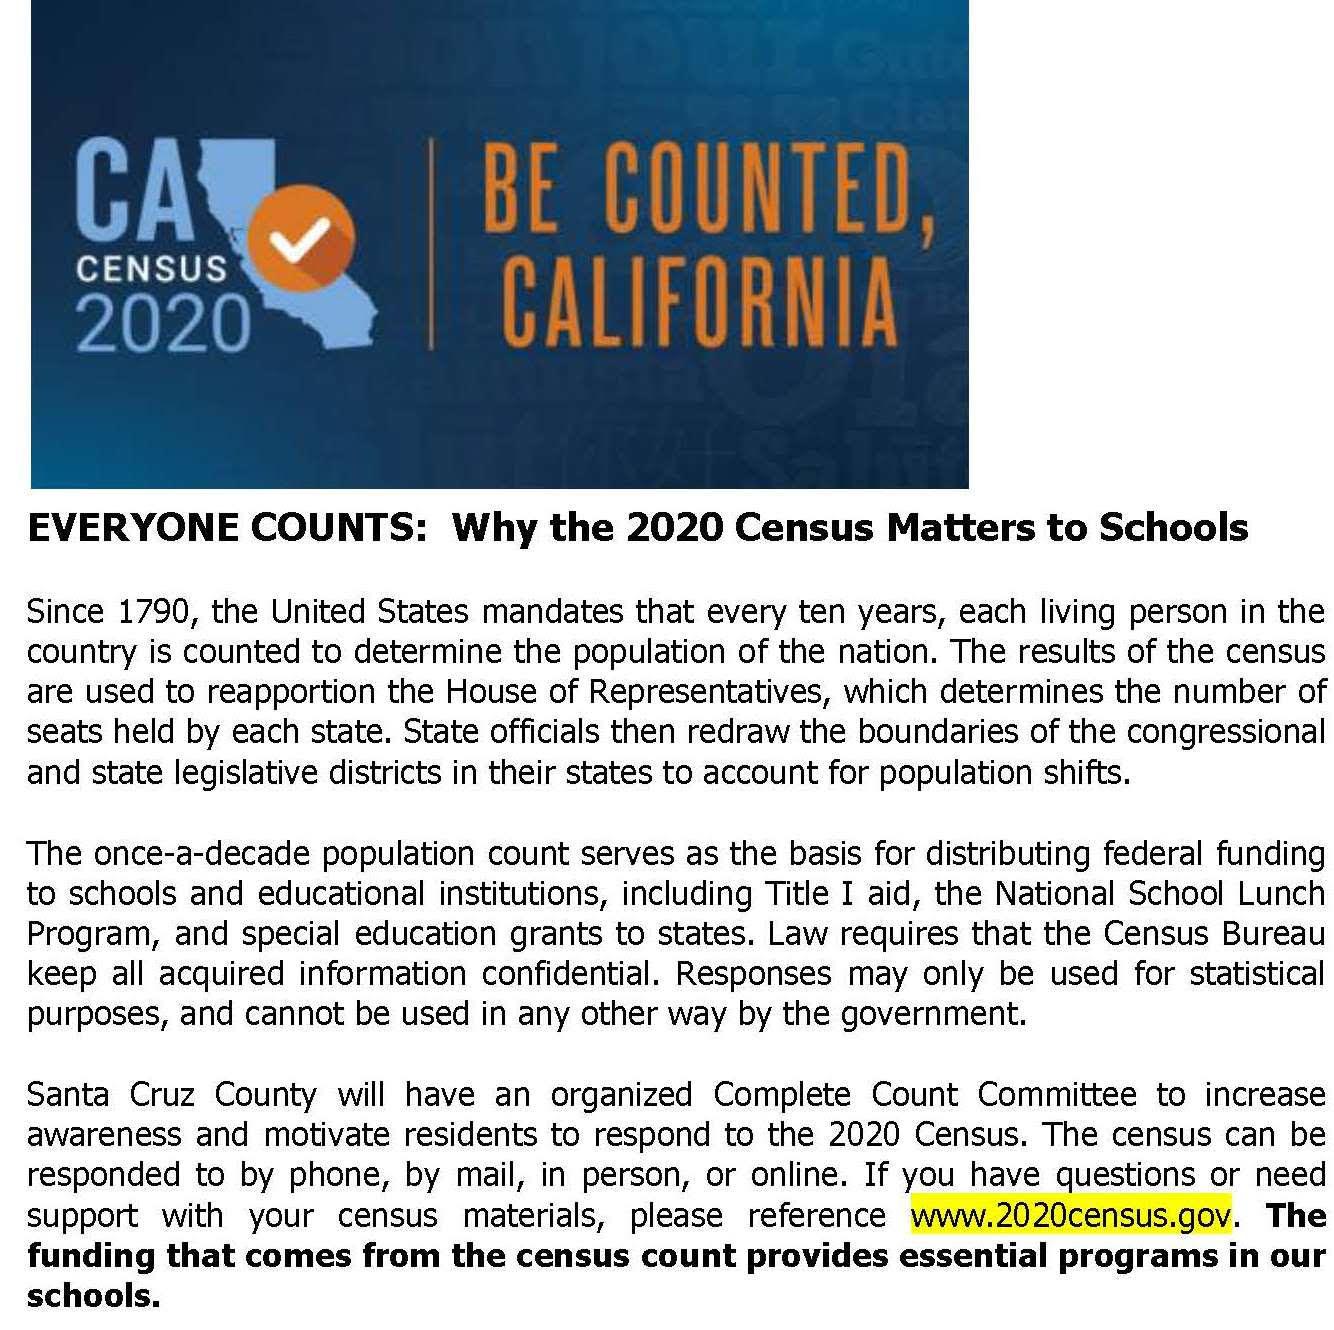 CA Census 2020 Be counted, California; visit www.2020census.gov for information